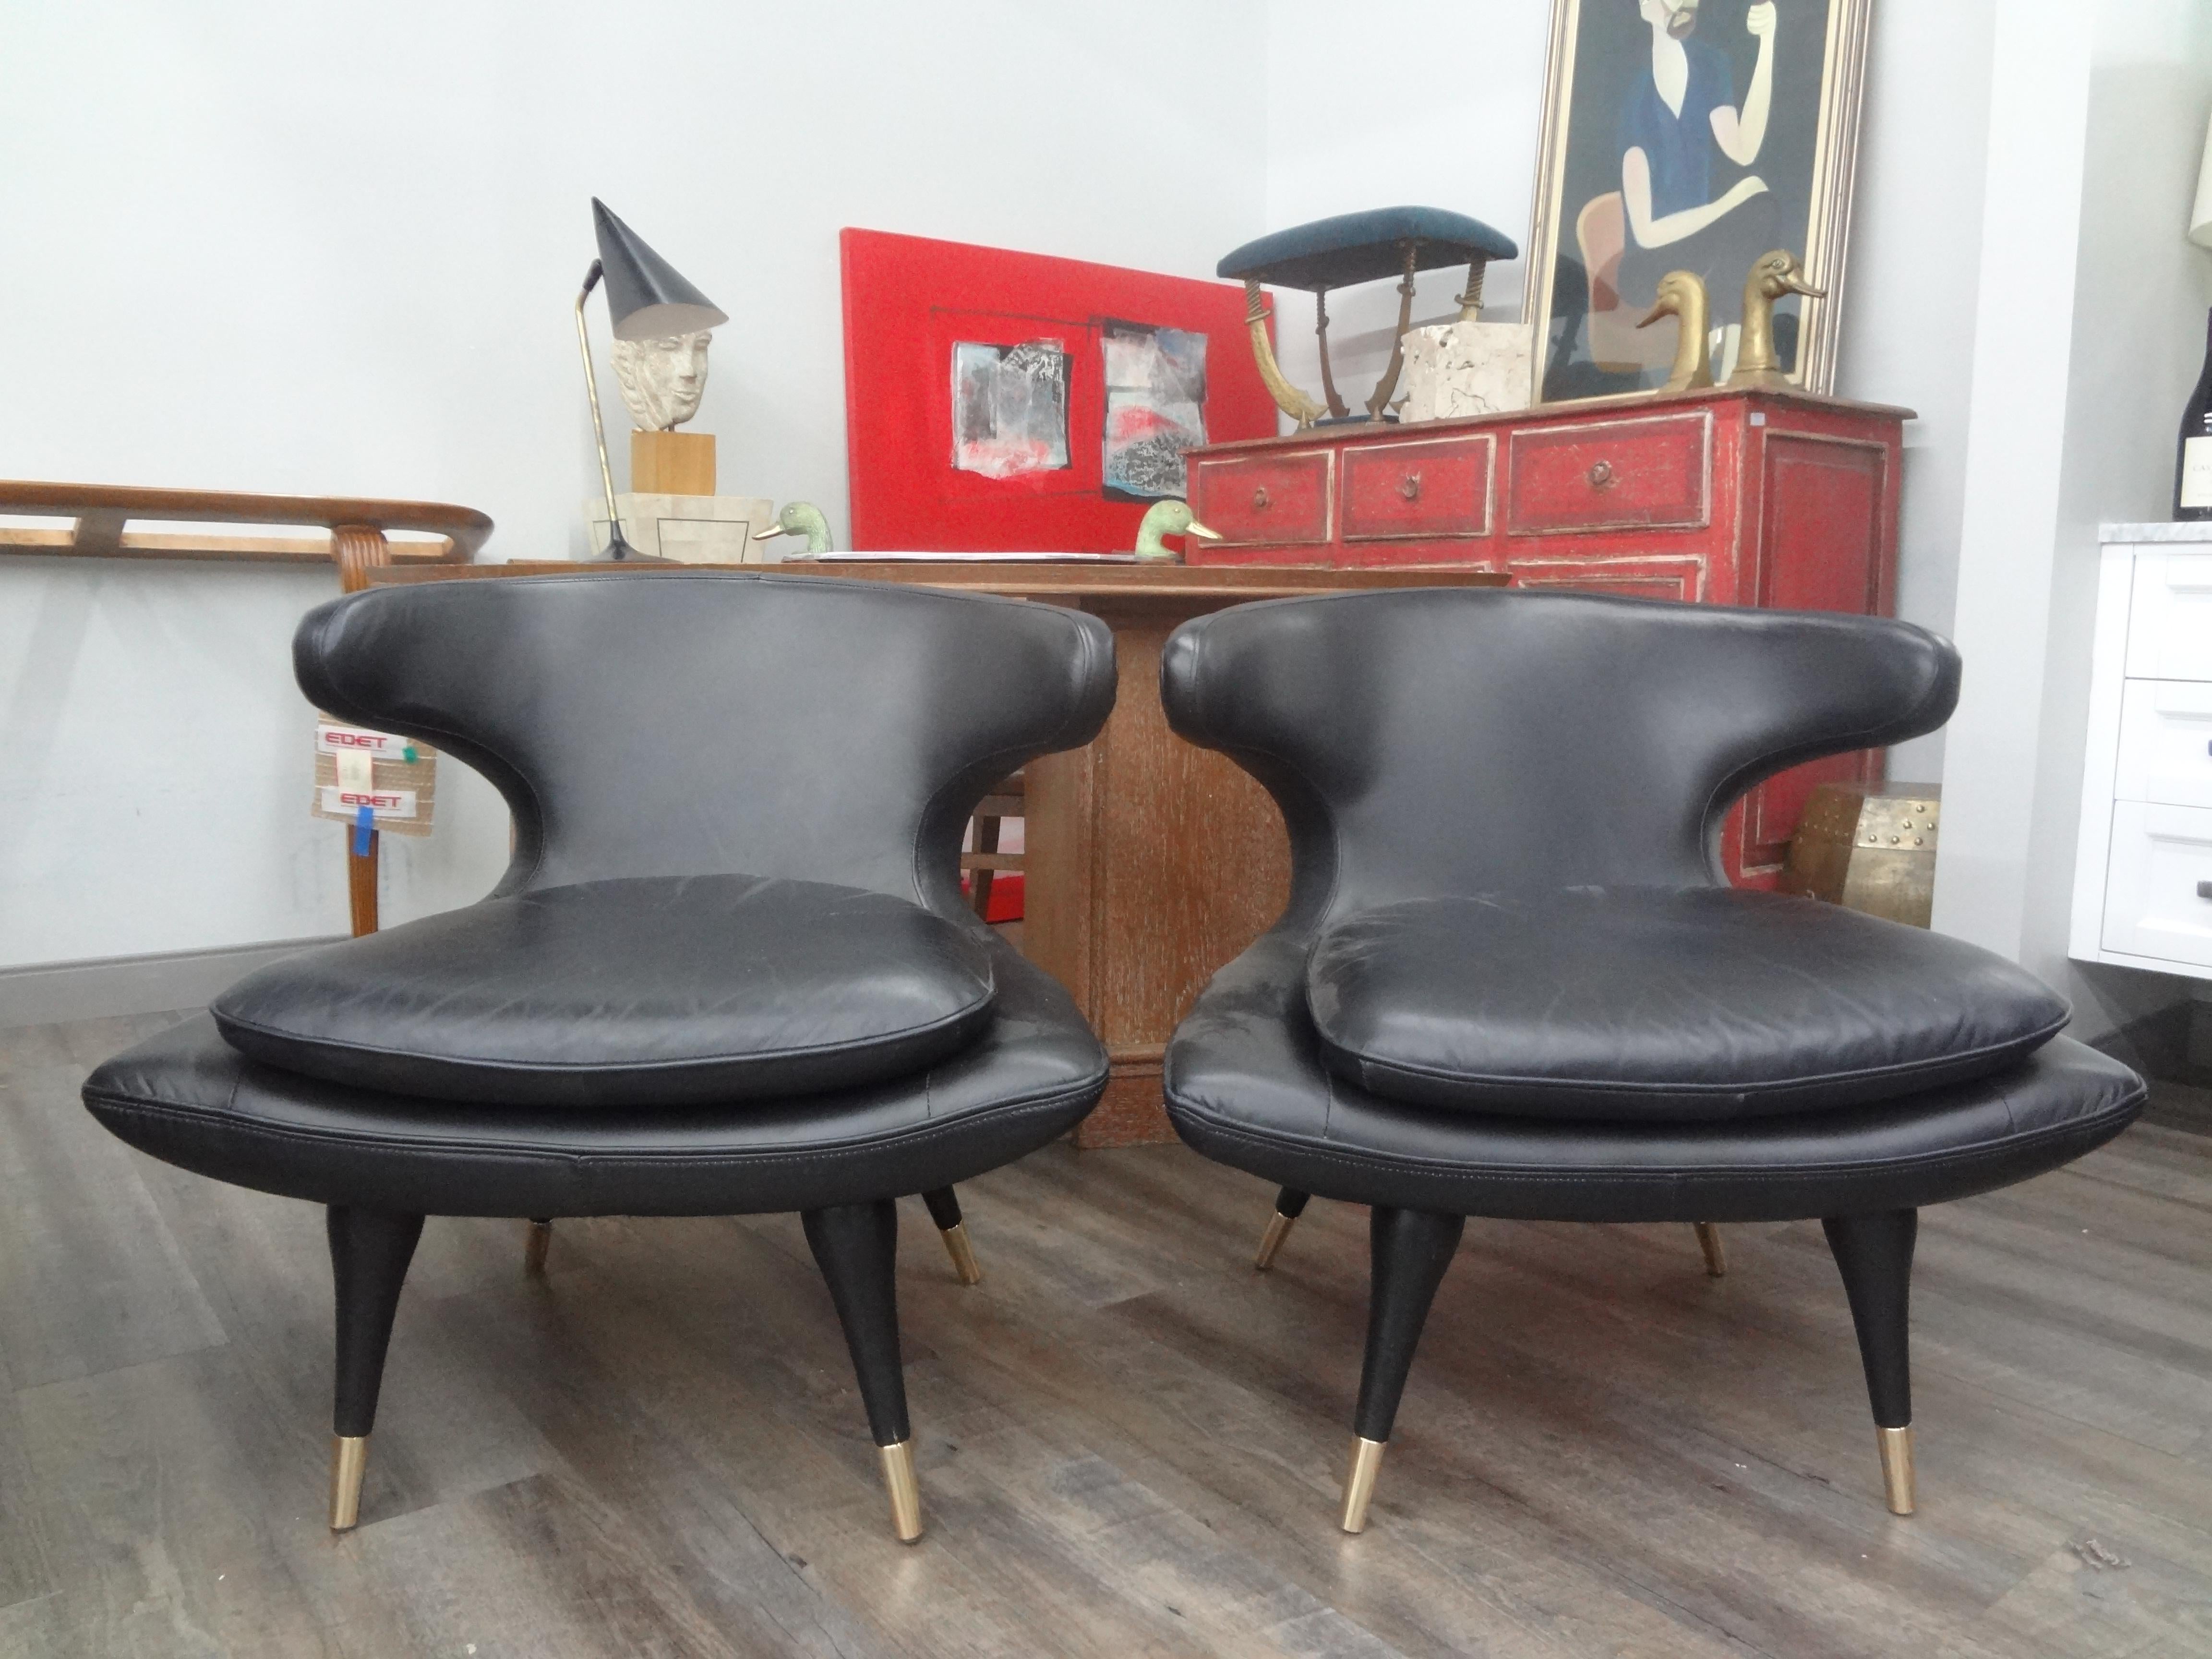 Pair of Italian Modern Curved Back Chairs Upholstered in Black Leather For Sale 4